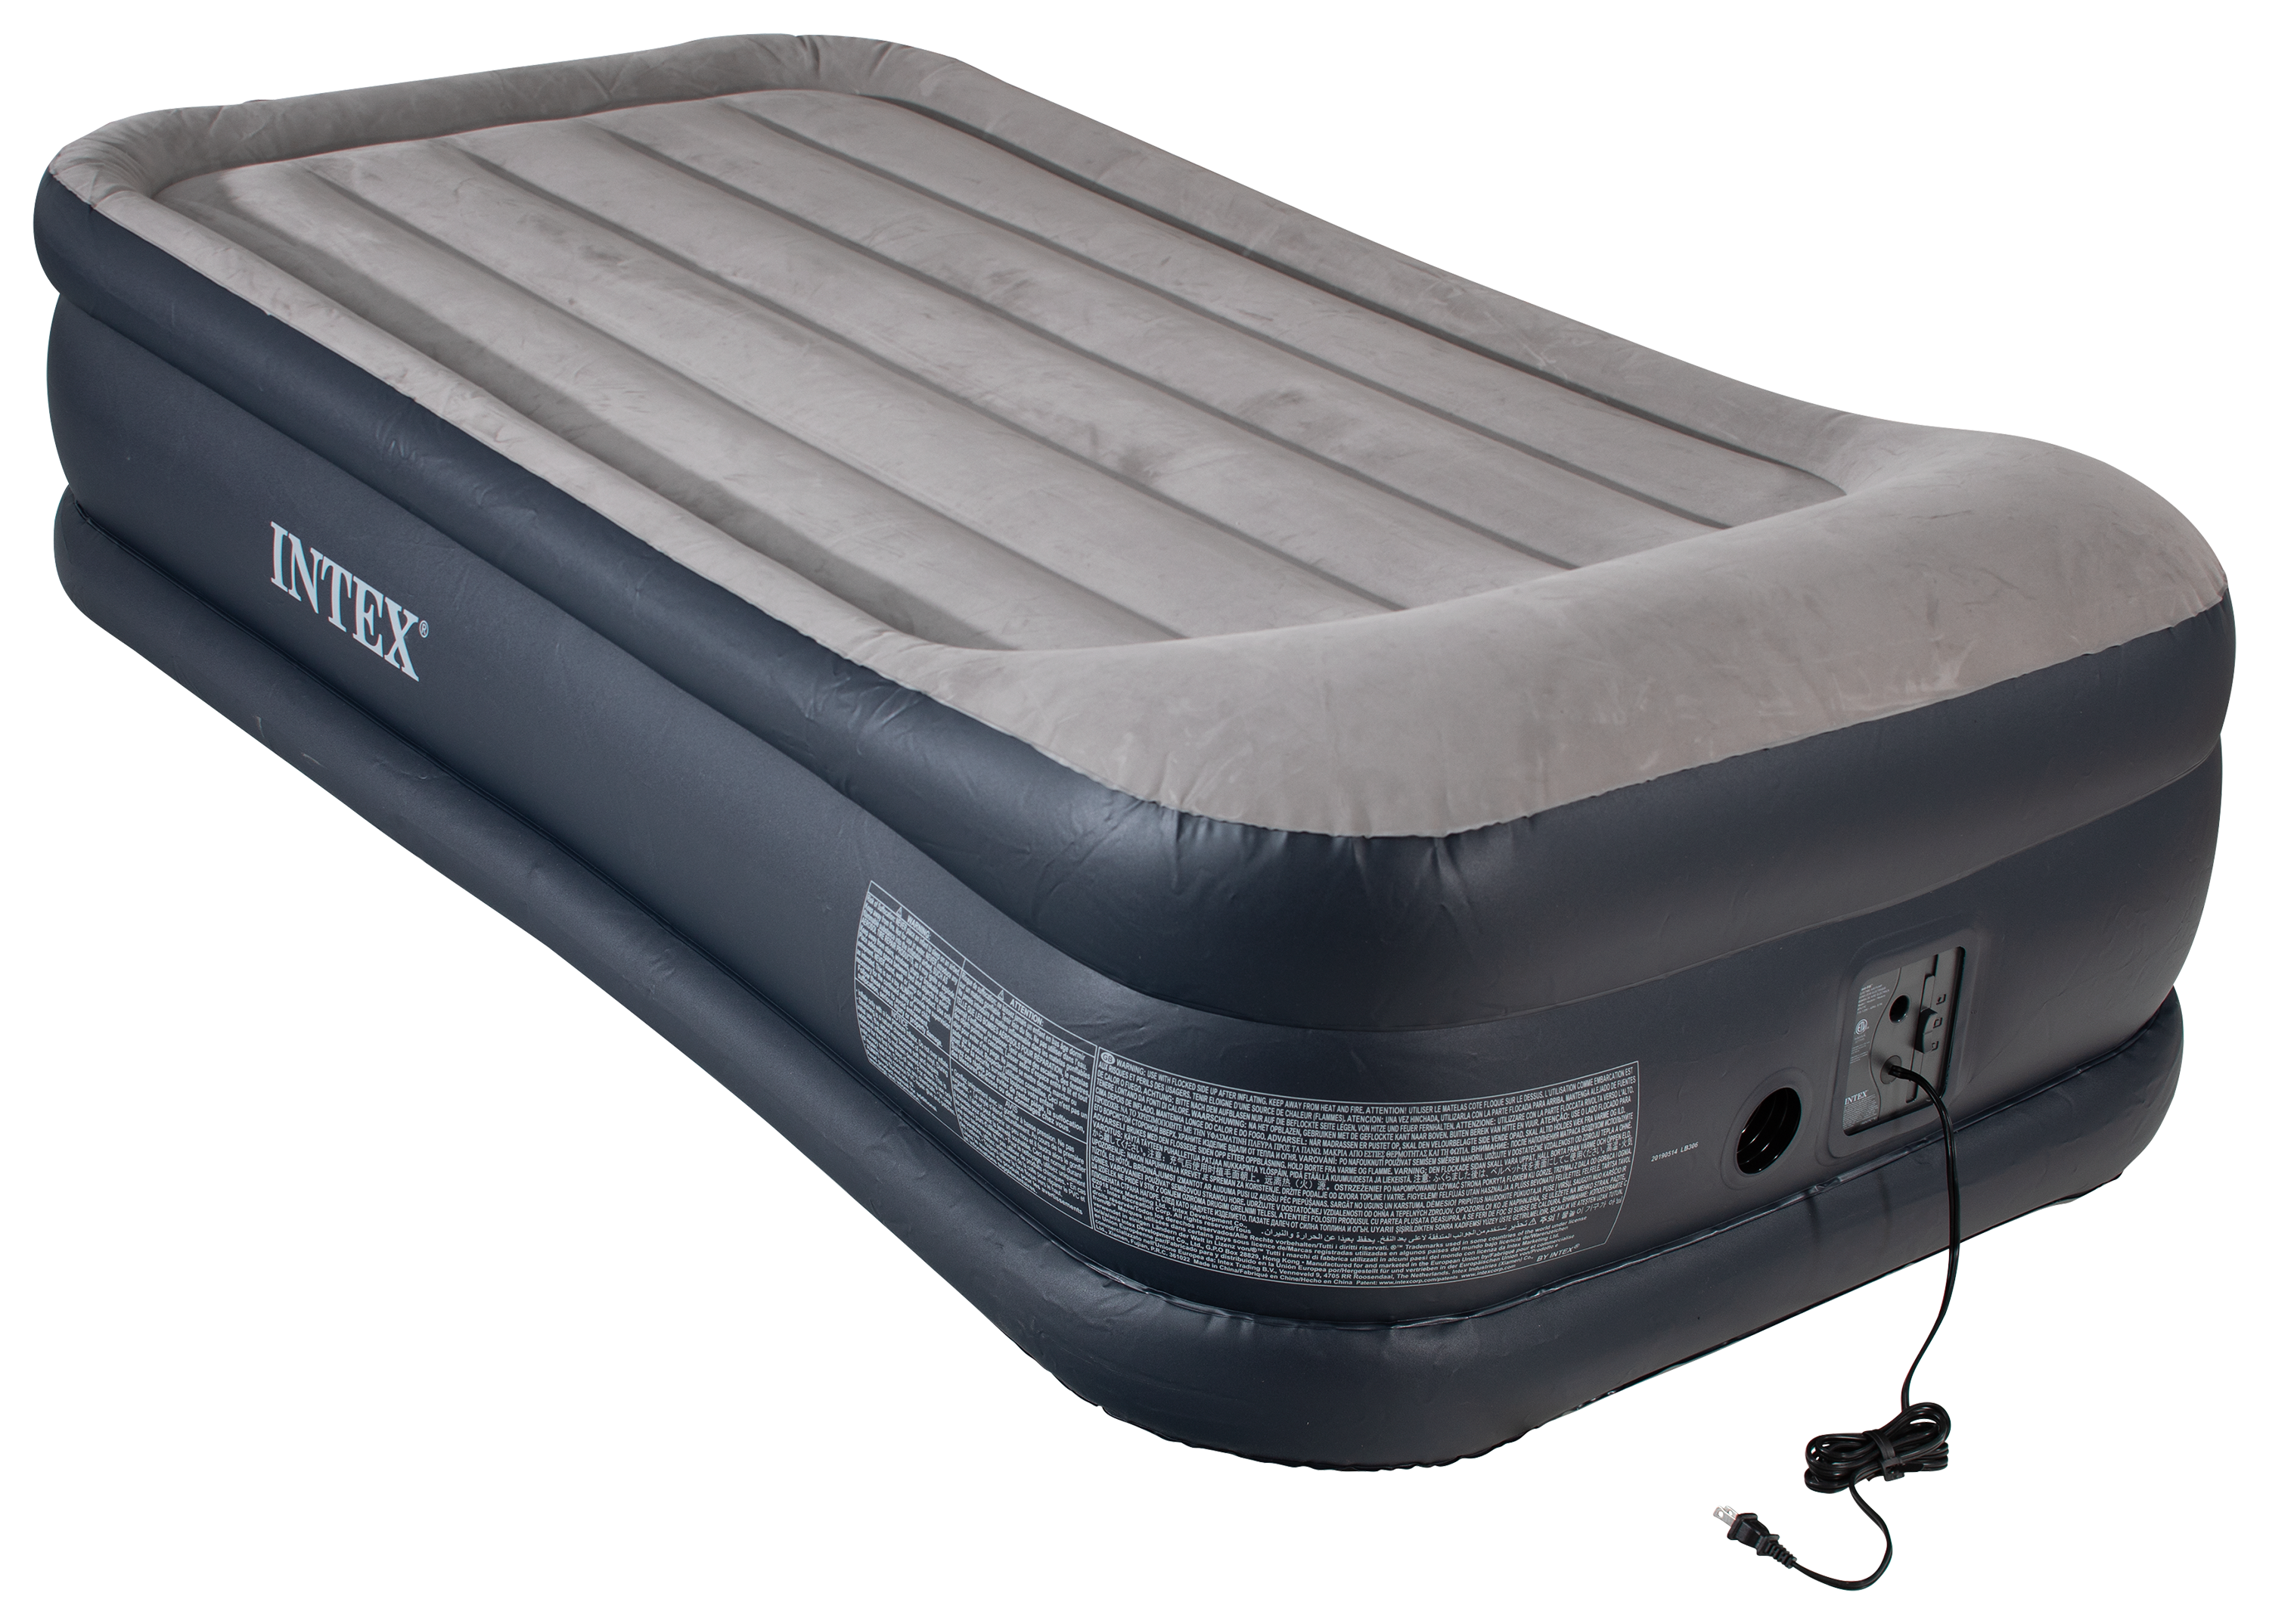 Intex Deluxe Pillow Rest Airbed with Built-In Pump